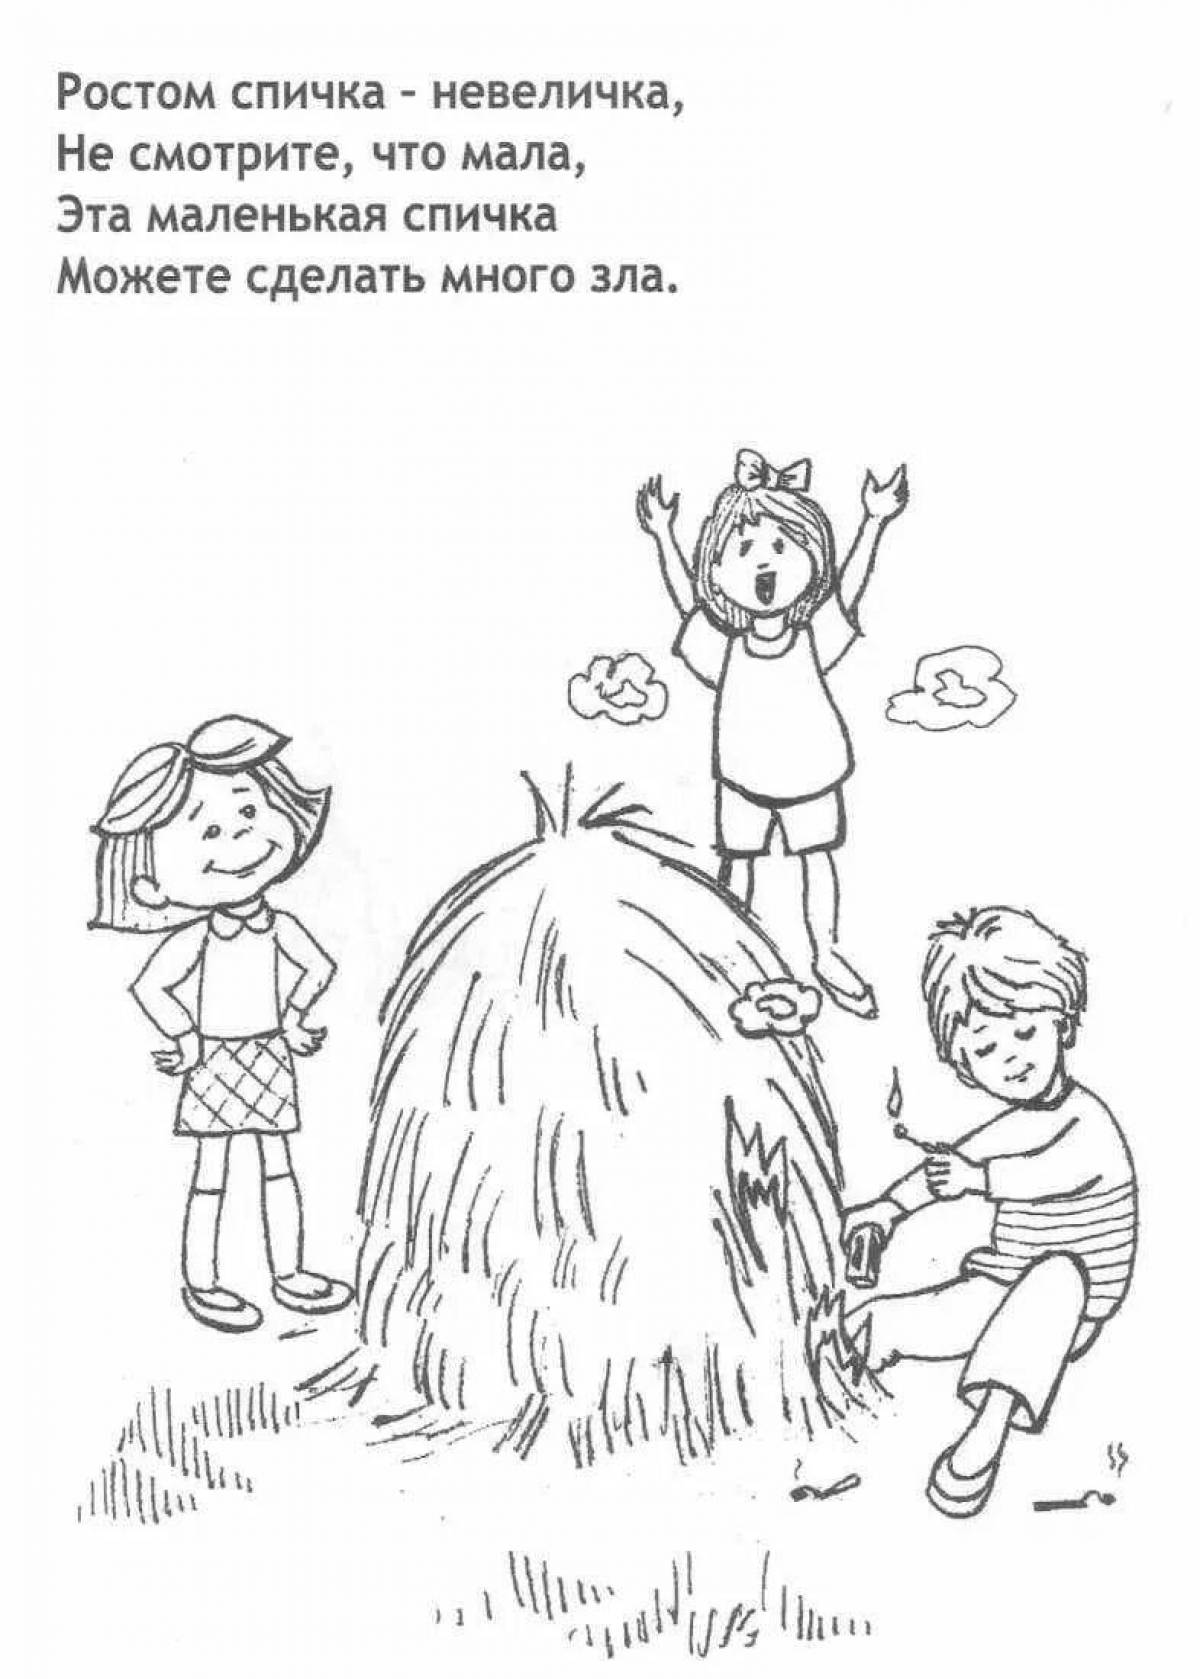 Child Safety Coloring Page